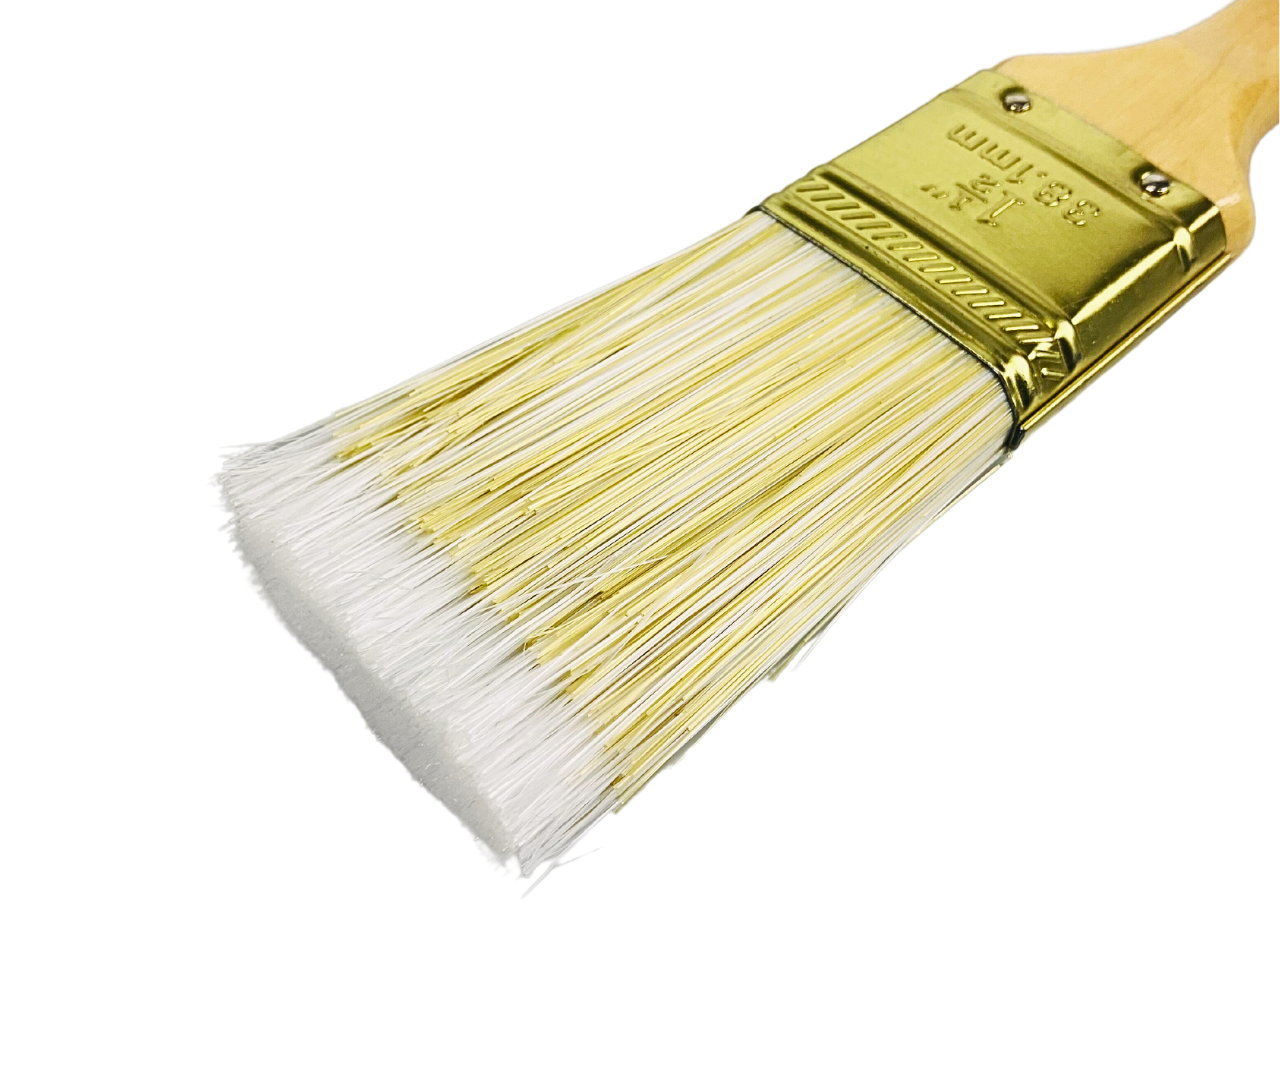 1.5" Wide Bristle Brush for House Painting, Varnish or Lacquer, Wooden Handle (Pack of: 2) - TZ63-28441-Z02